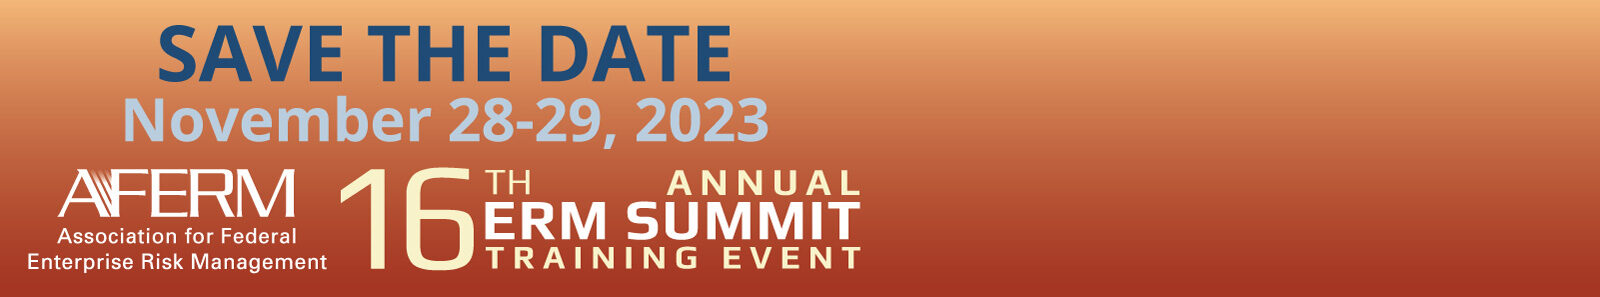 Save the Date for 2023 ERM Summit